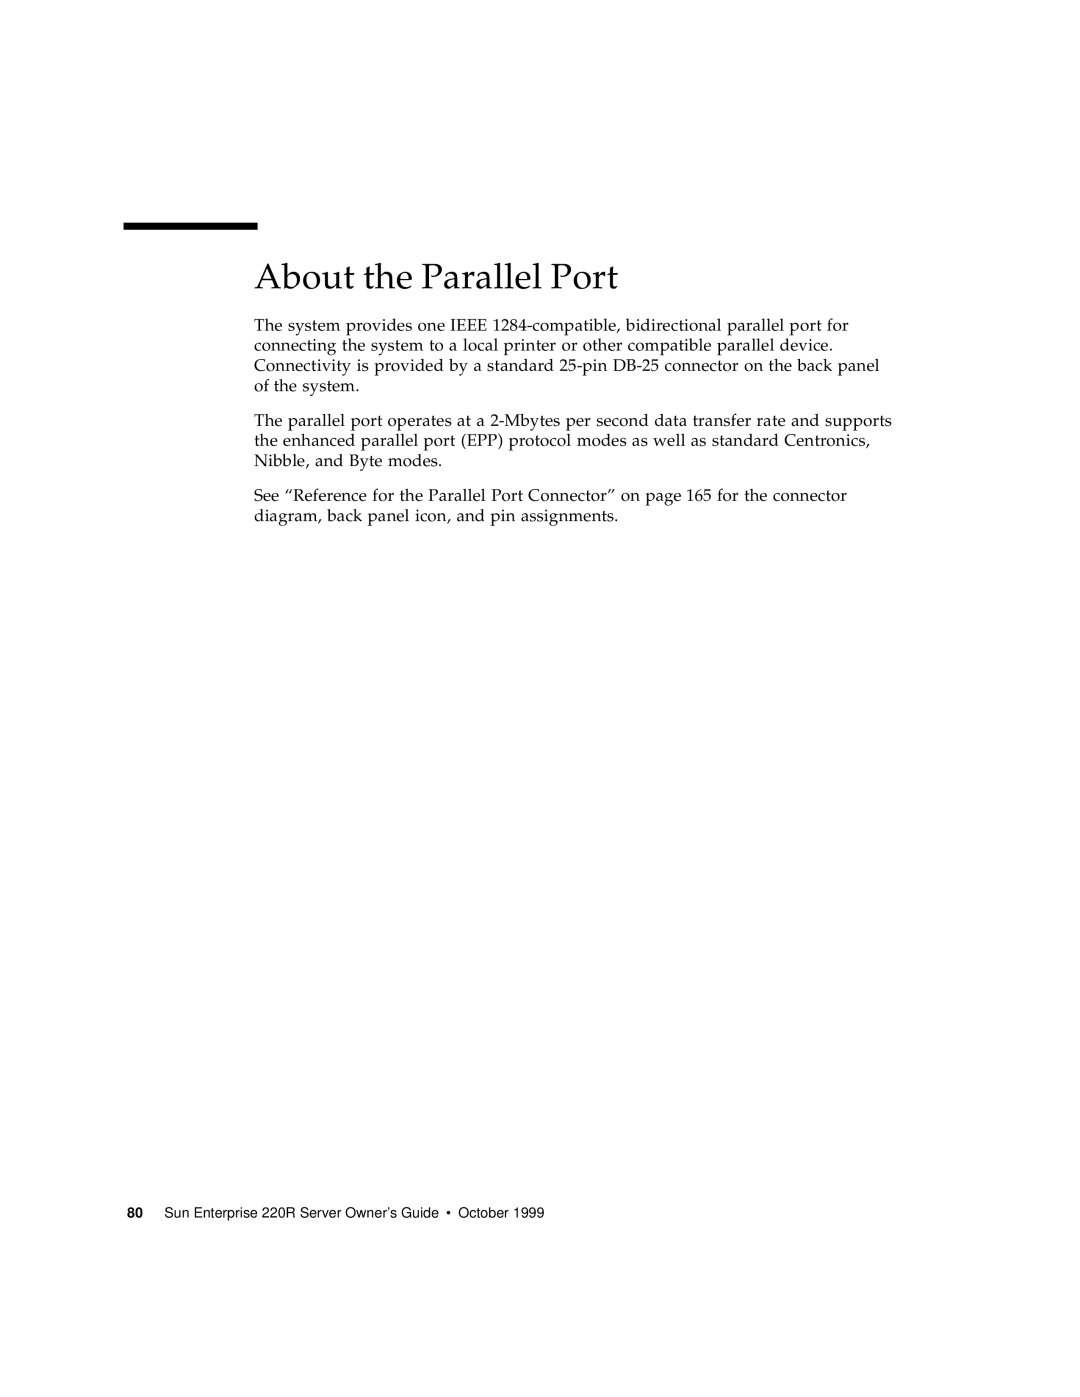 Sun Microsystems manual About the Parallel Port, Sun Enterprise 220R Server Owner’s Guide October 